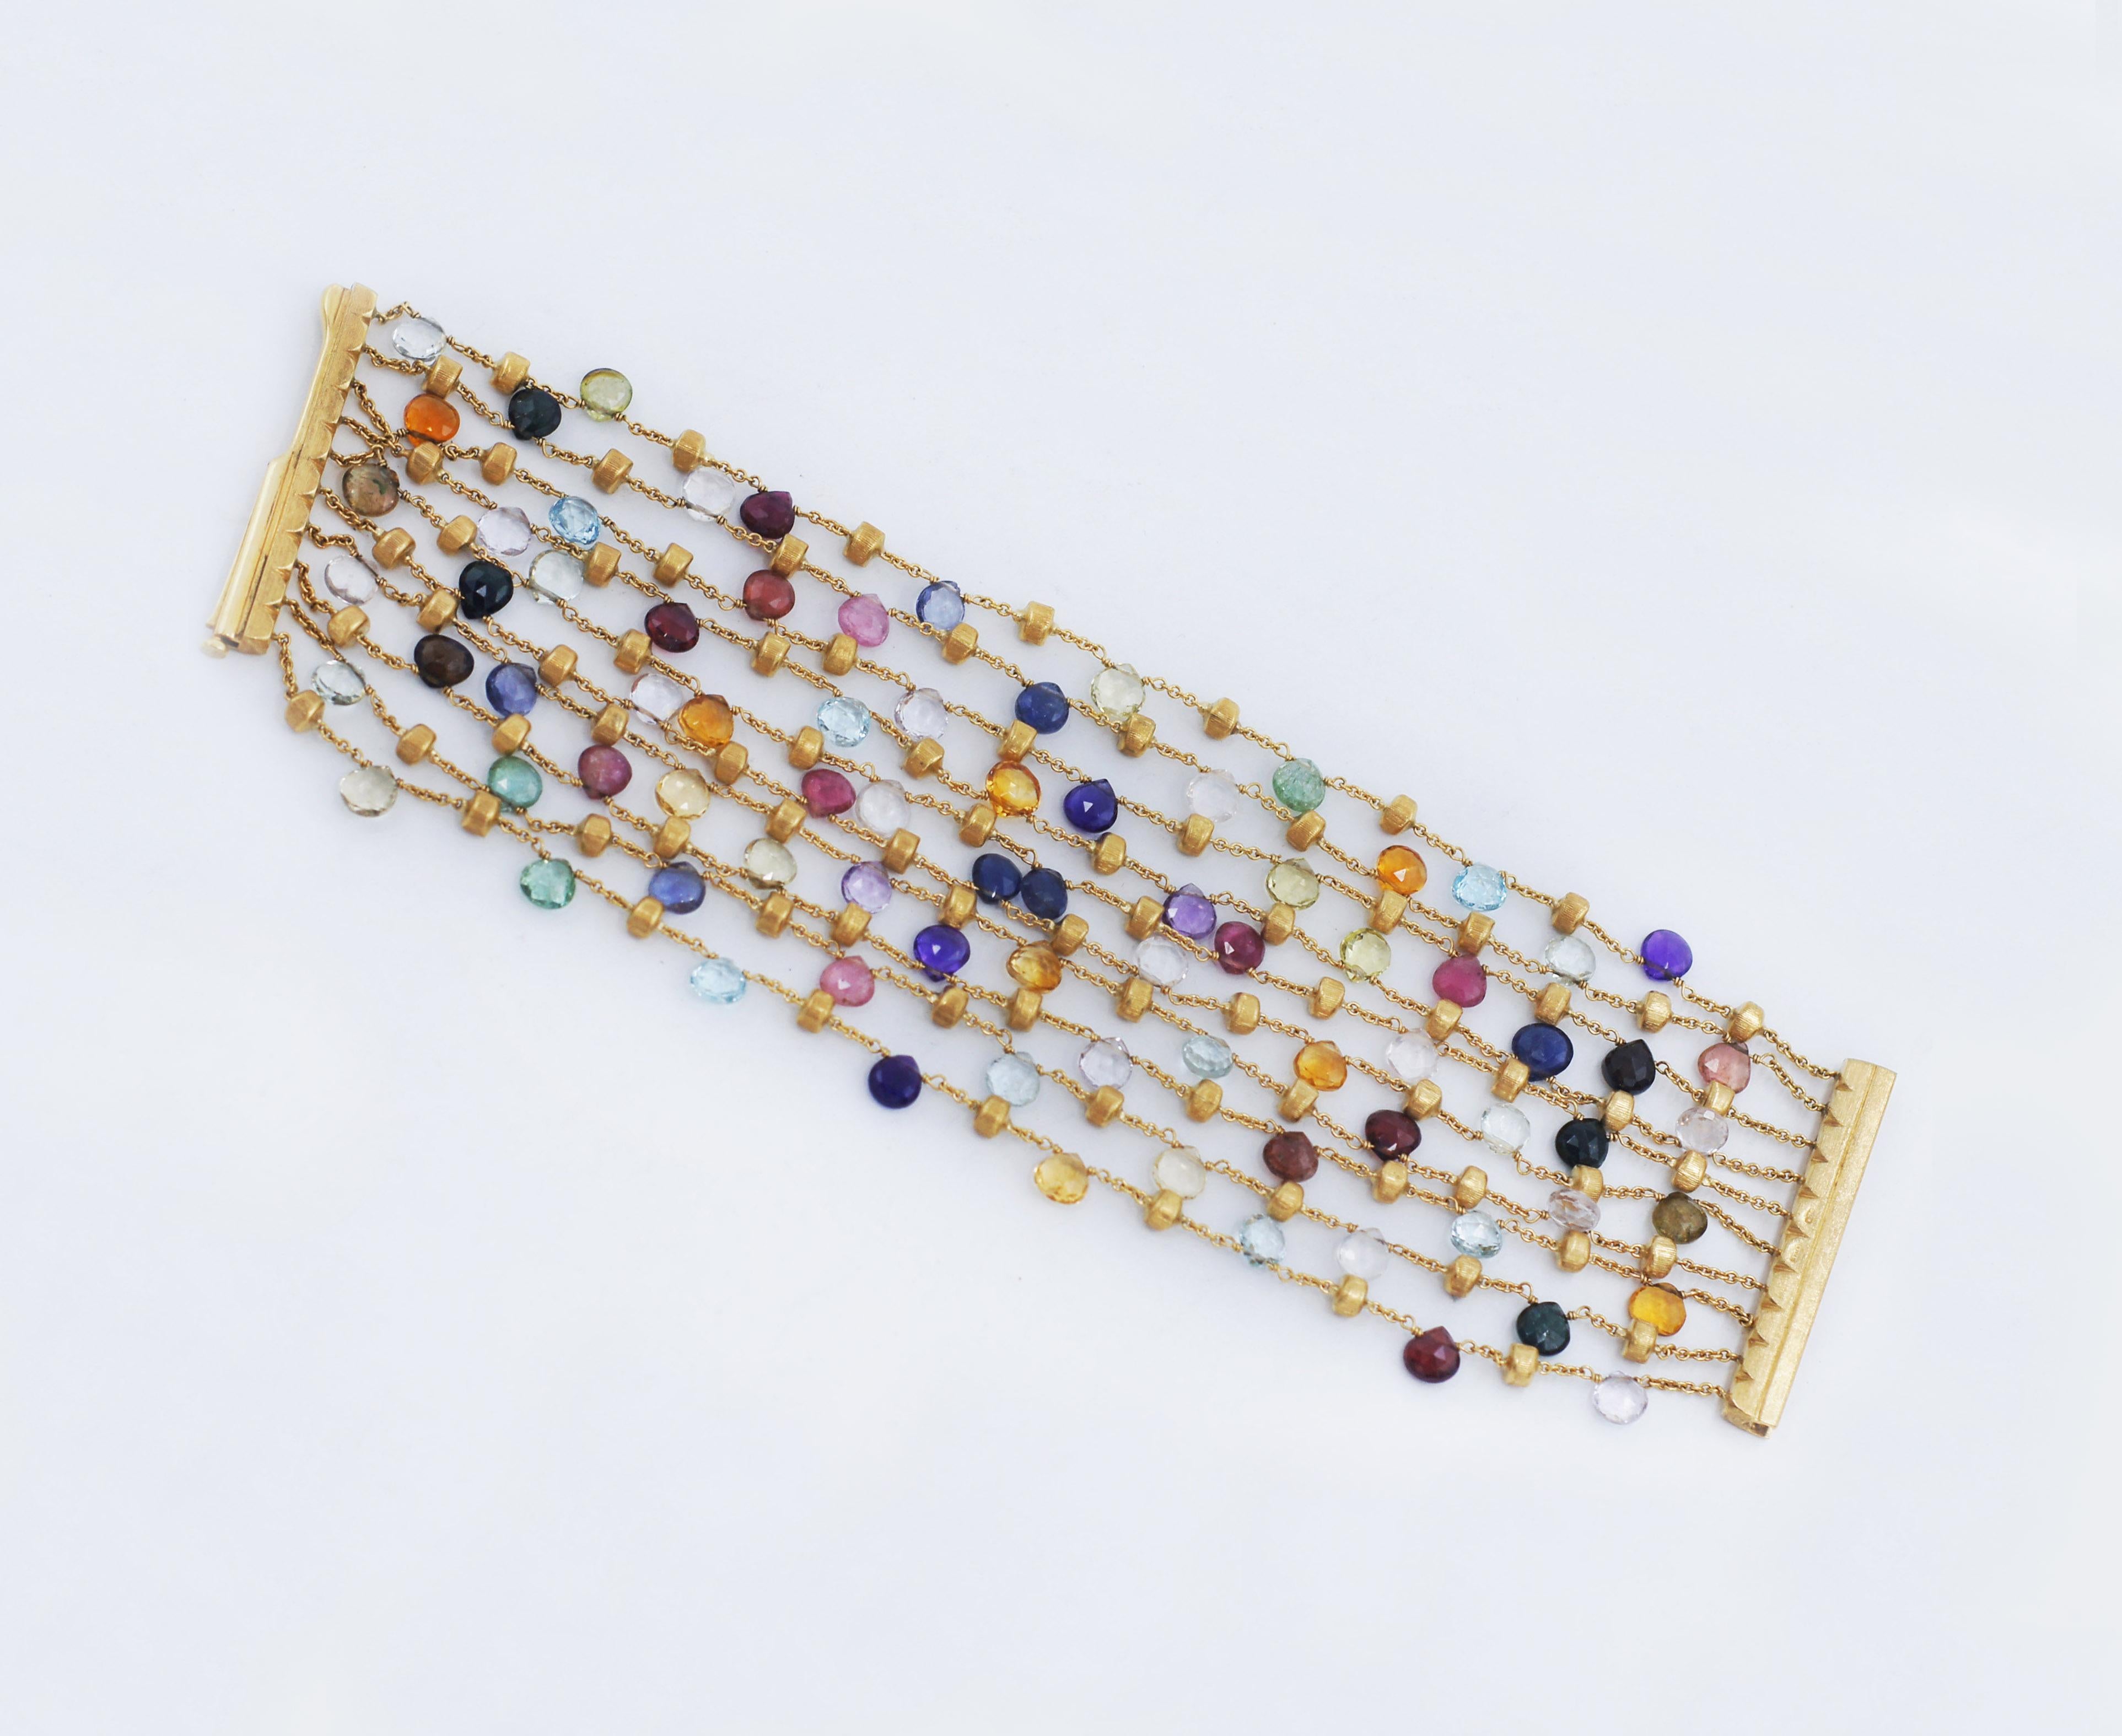 MARCO BICEGO 
Paradise Collection 
Multicolor Gemstones 
10 Strand Bracelet with mixed semi-precious colored stones
18k Yellow Gold 
Length: 7.25